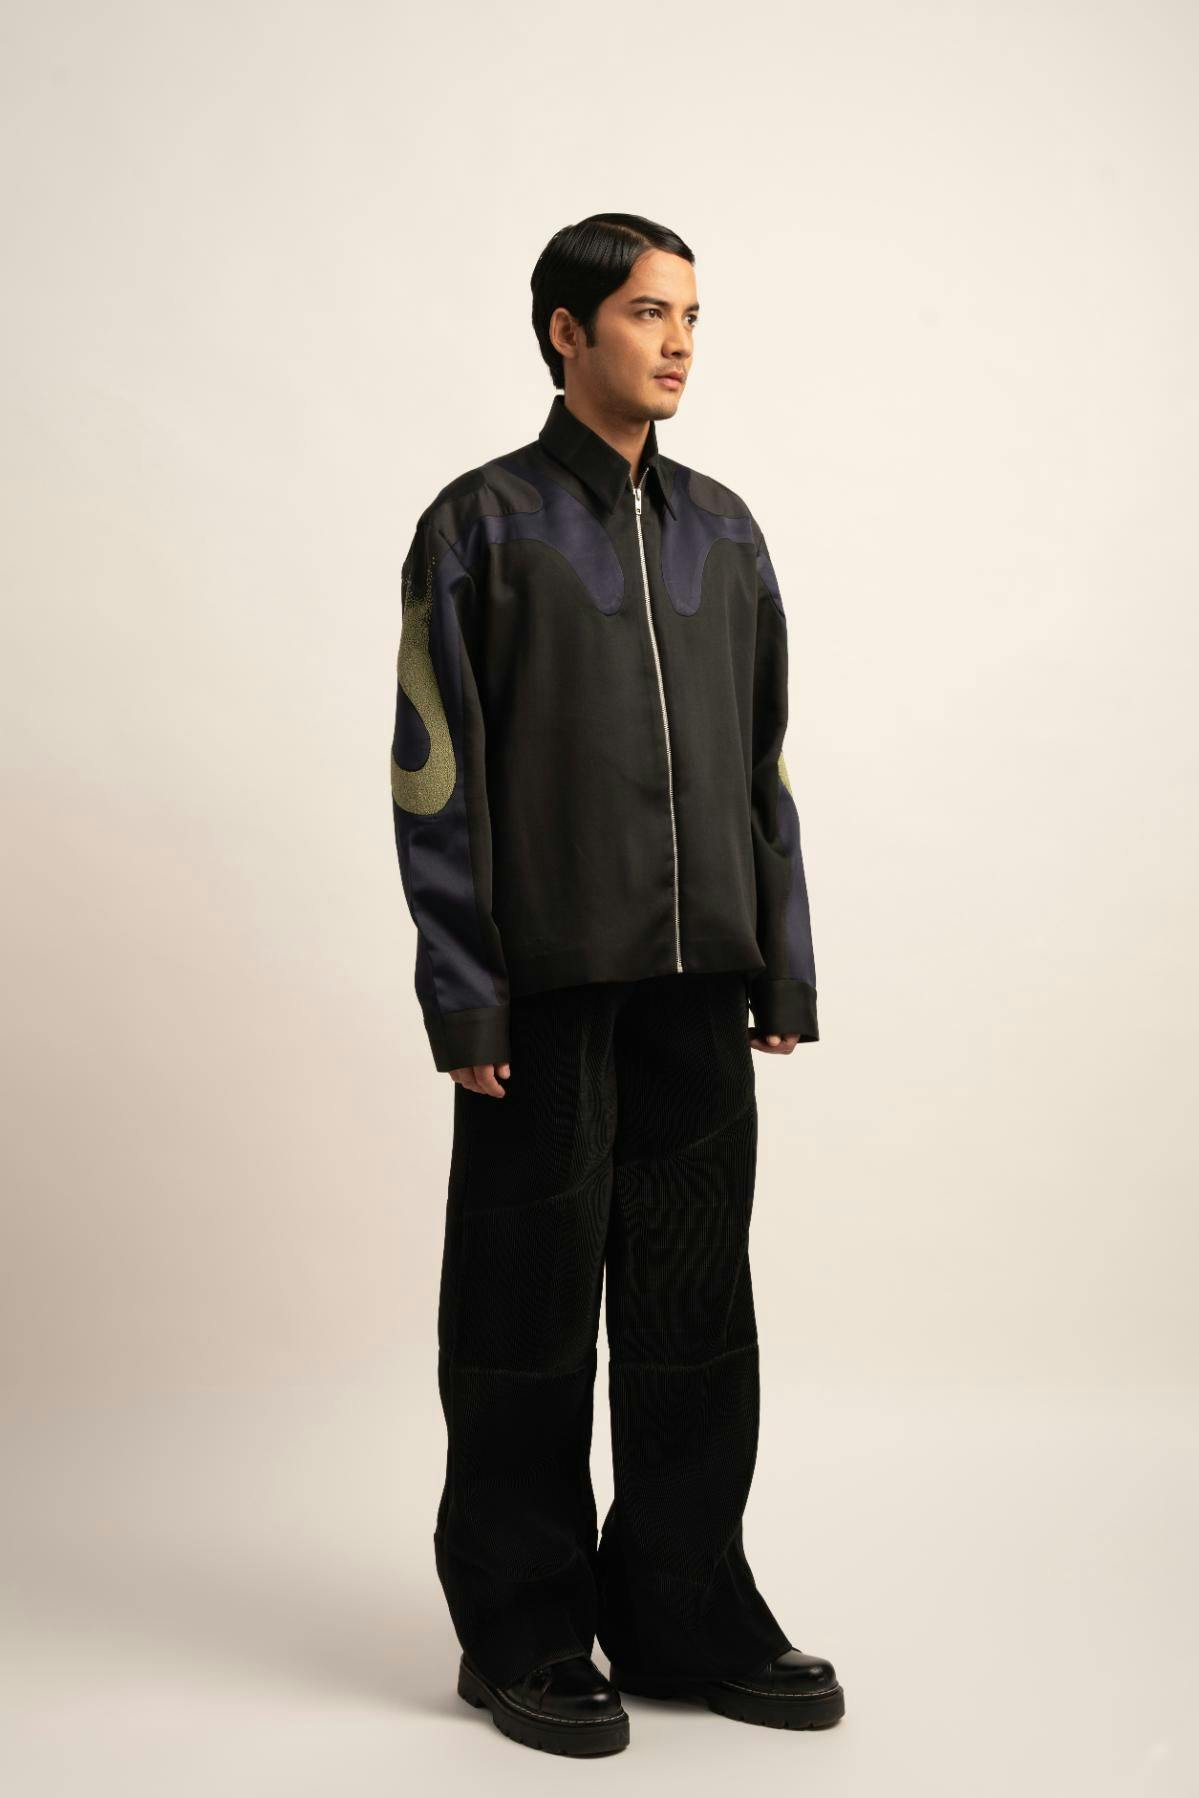 Flux Spectrum Jacket, a product by Siddhant Agrawal Label